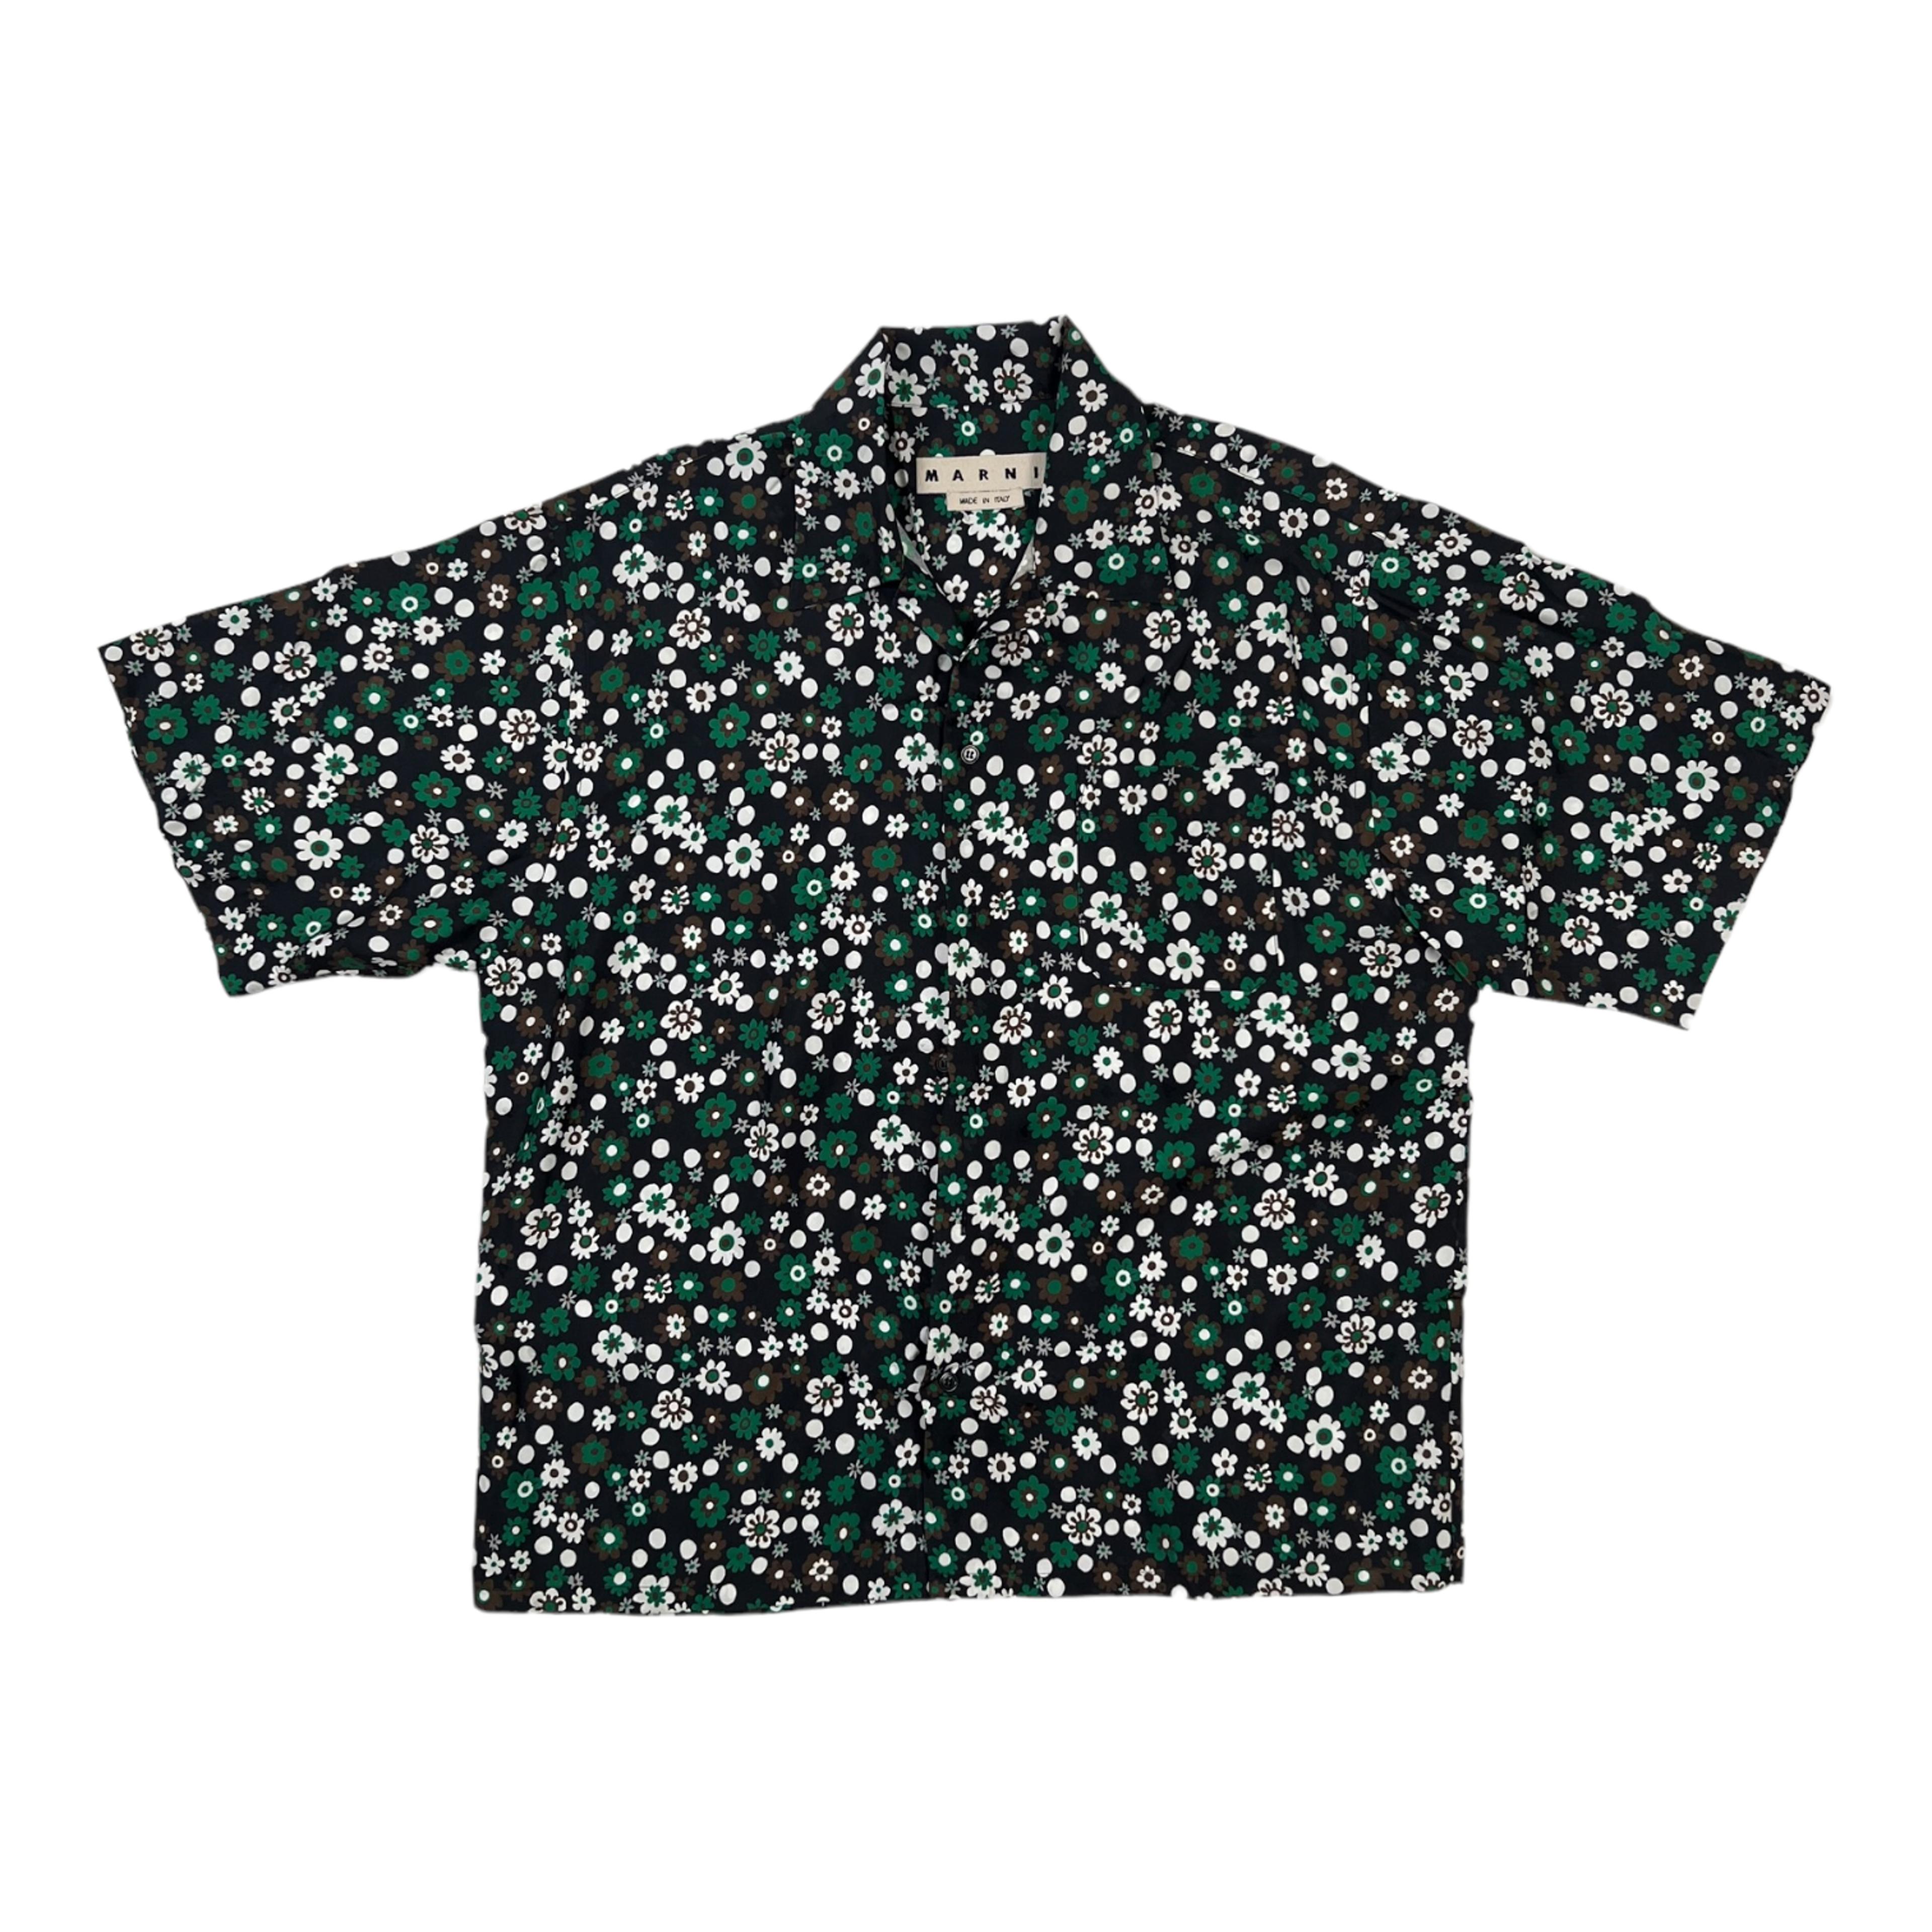 Marni Small Flower Button Down Black Green Pre-Owned